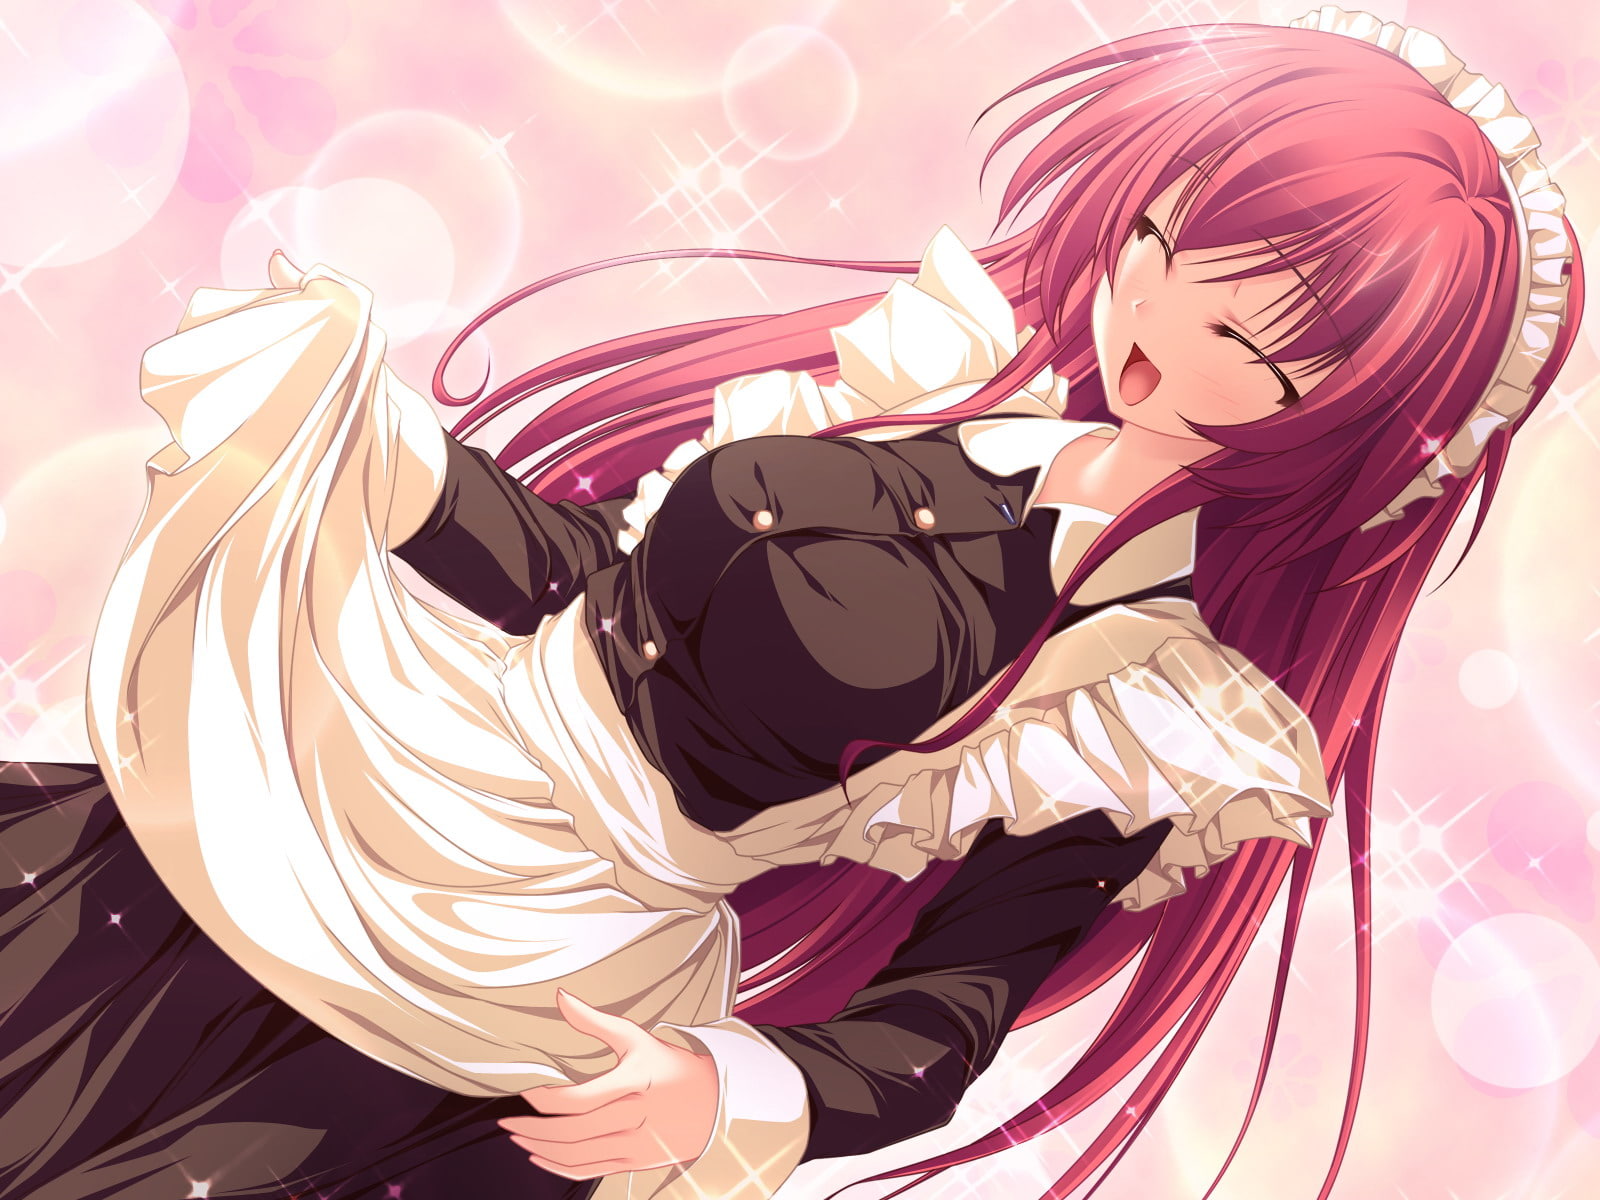 apron, finis, game, hair, long, magus, maid, red, seera, tale